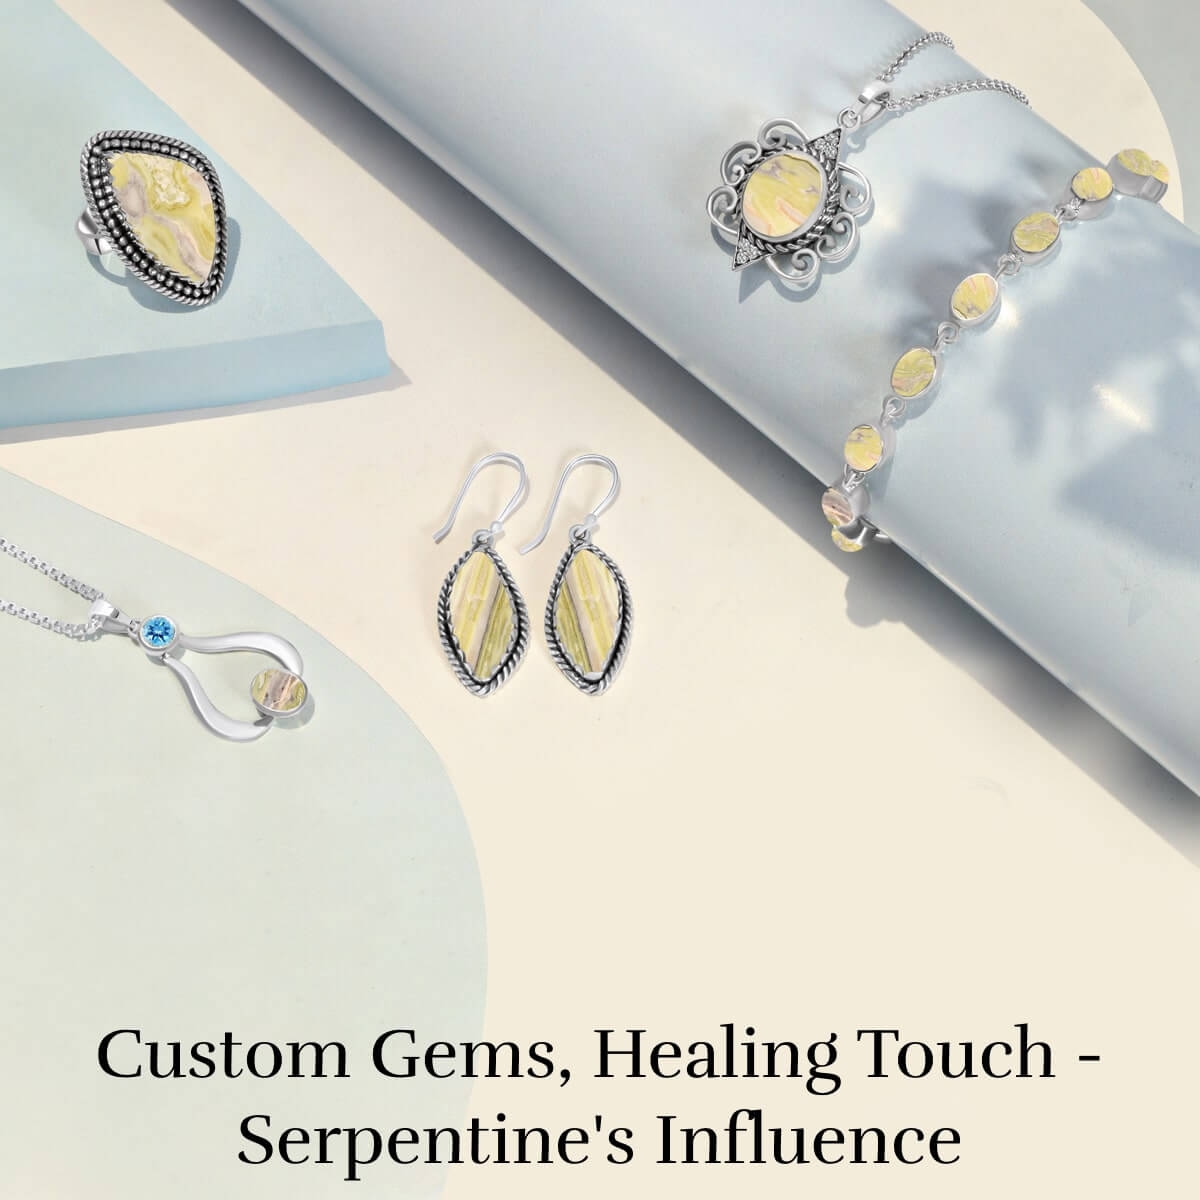 Your Physical Health Can Heal With Serpentine Custom Jewelry